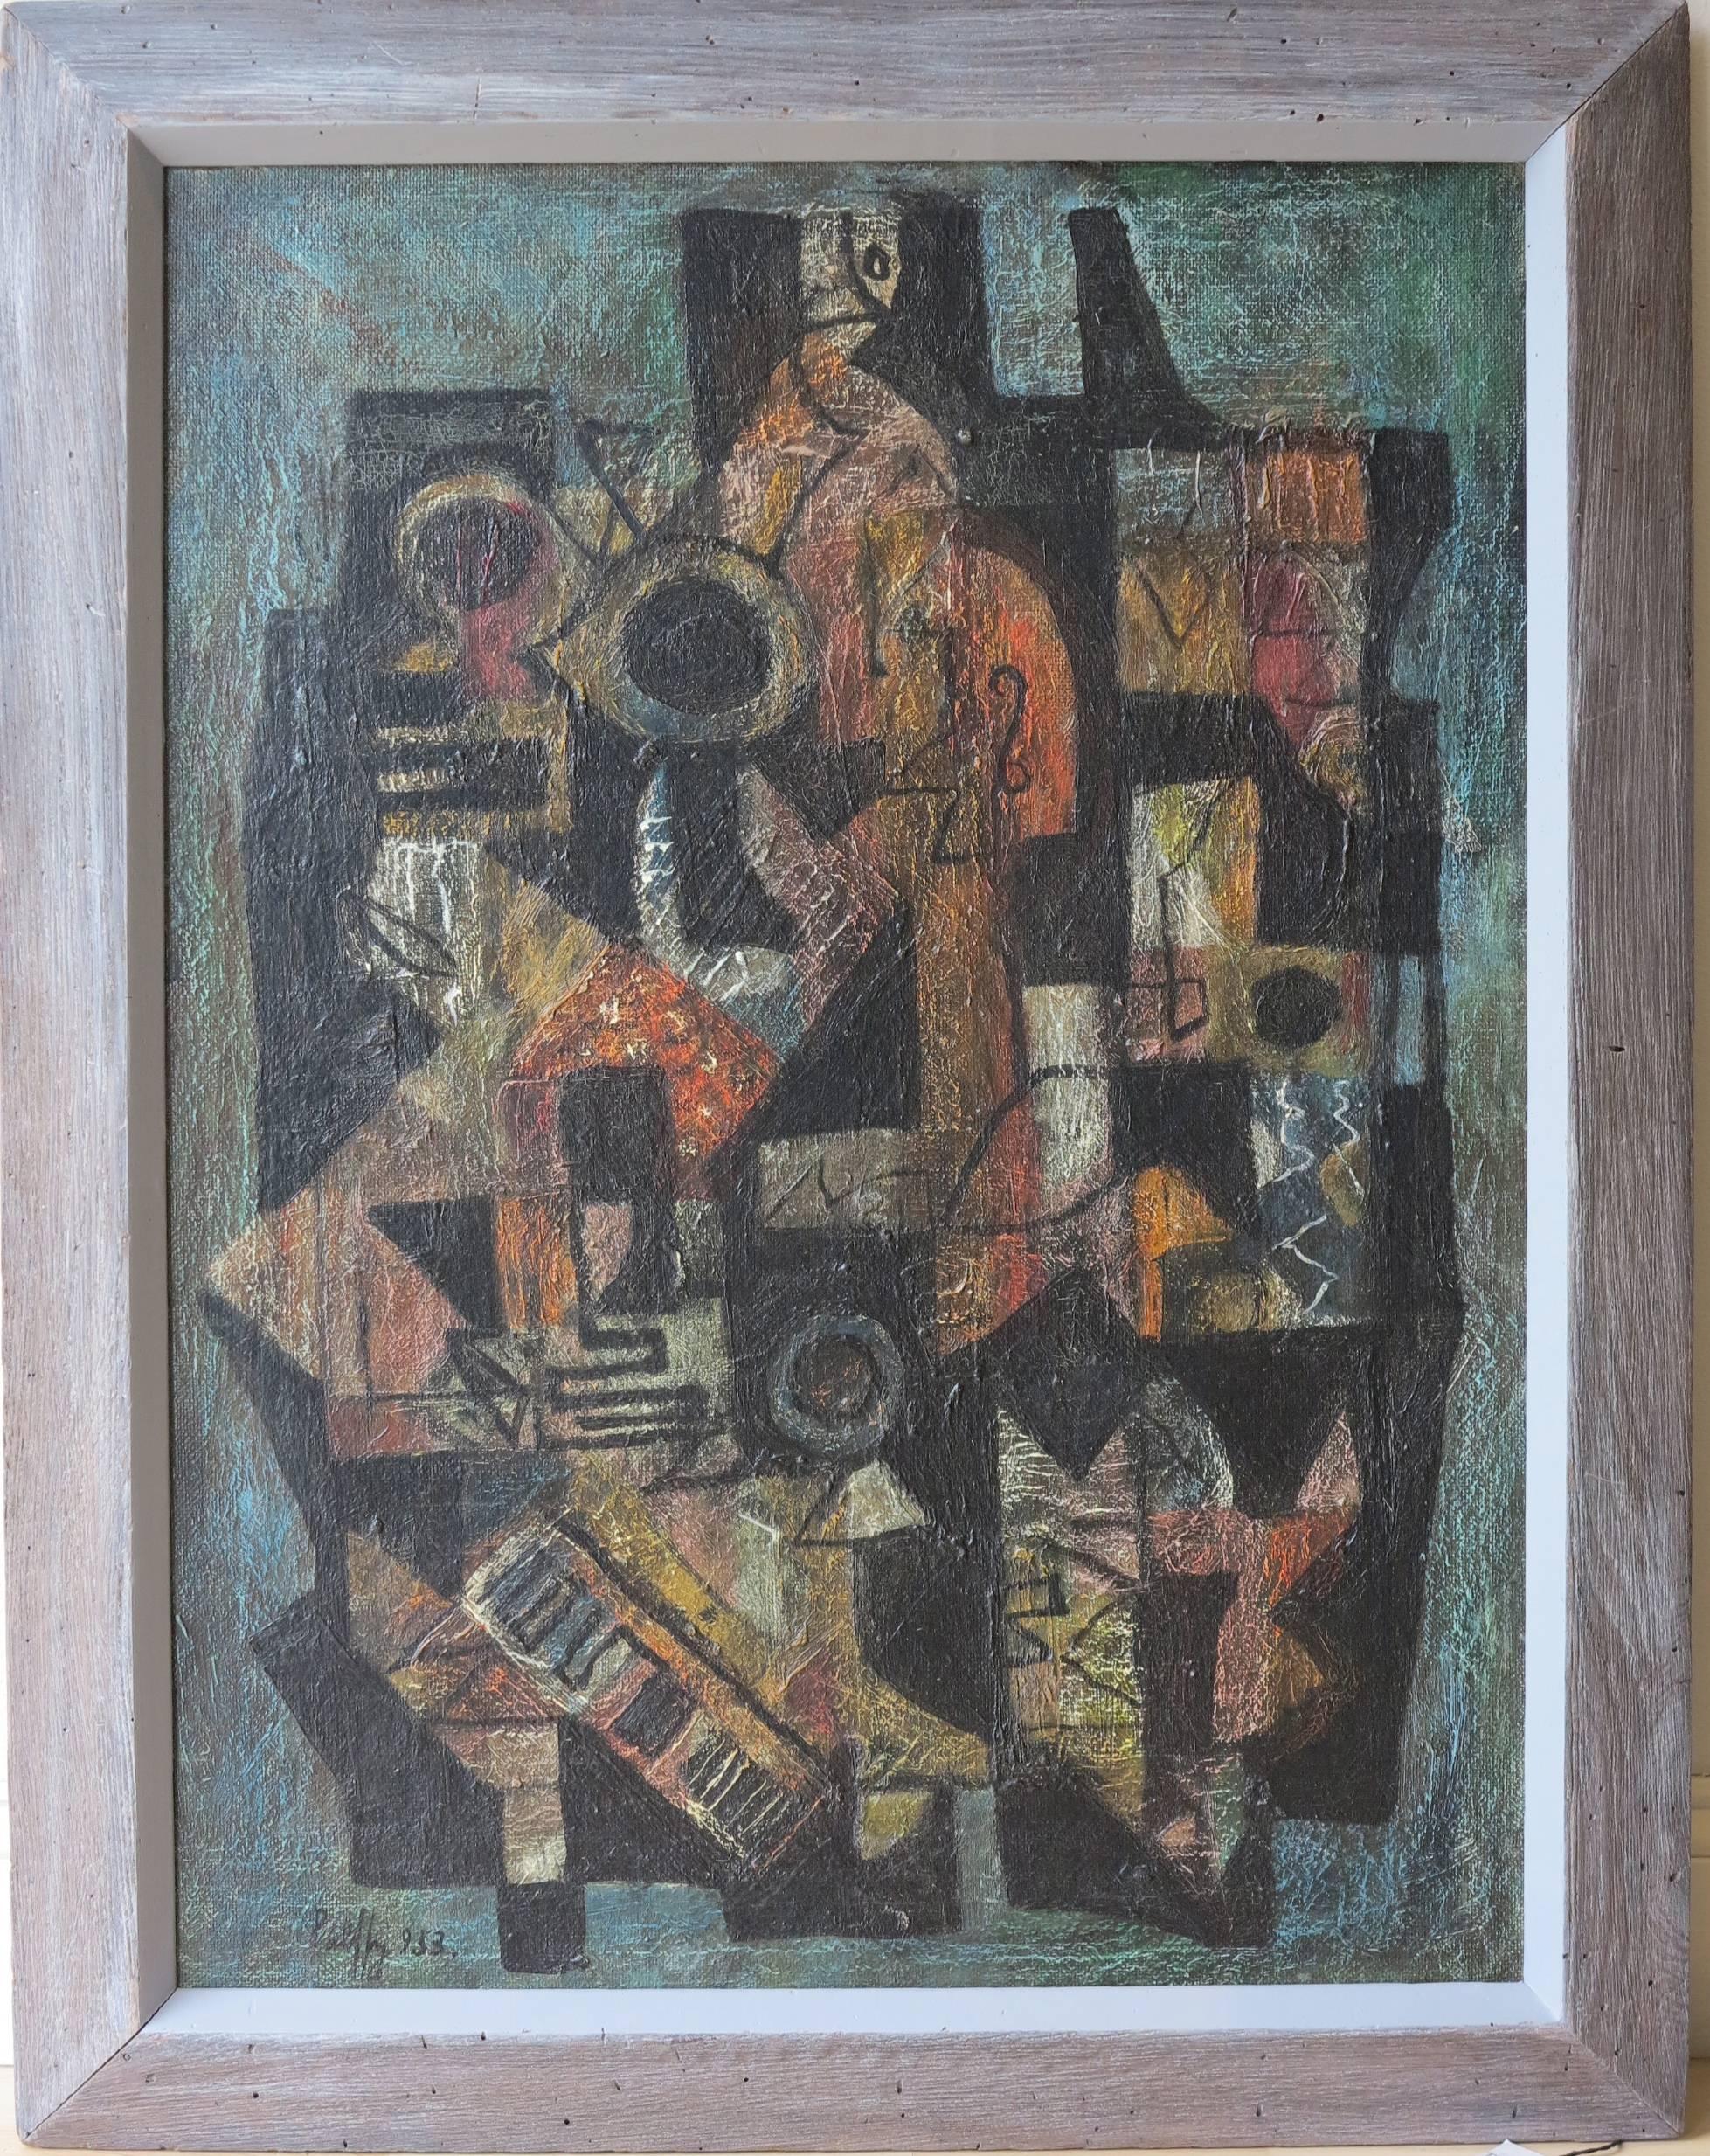 Beautiful cubist painting by Austrian artist, Peter Palffy (1899-1987). Musicians, 1953. Oil on masonite panel, measures 60 x 80 cm or approximately 23.5 x 31.5 inches. Measures 30.5 x 38.5 inches in a vintage Heydenryk frame that is original to the